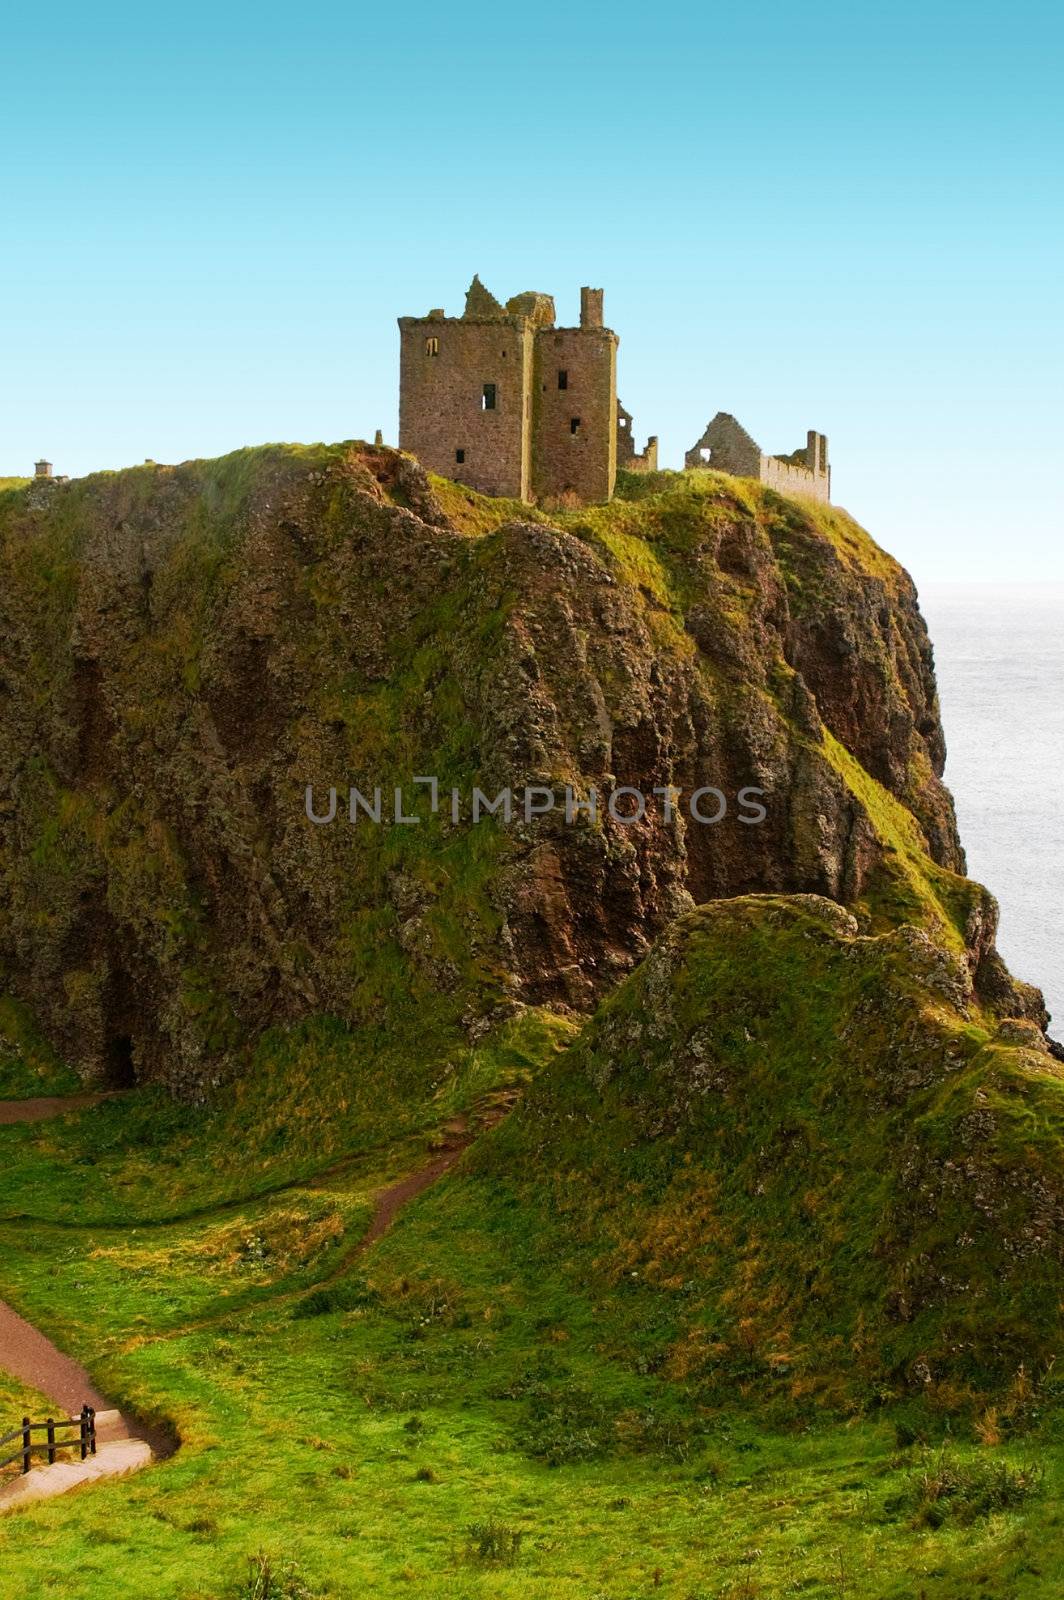 dunnottar castle stone haven by karinclaus